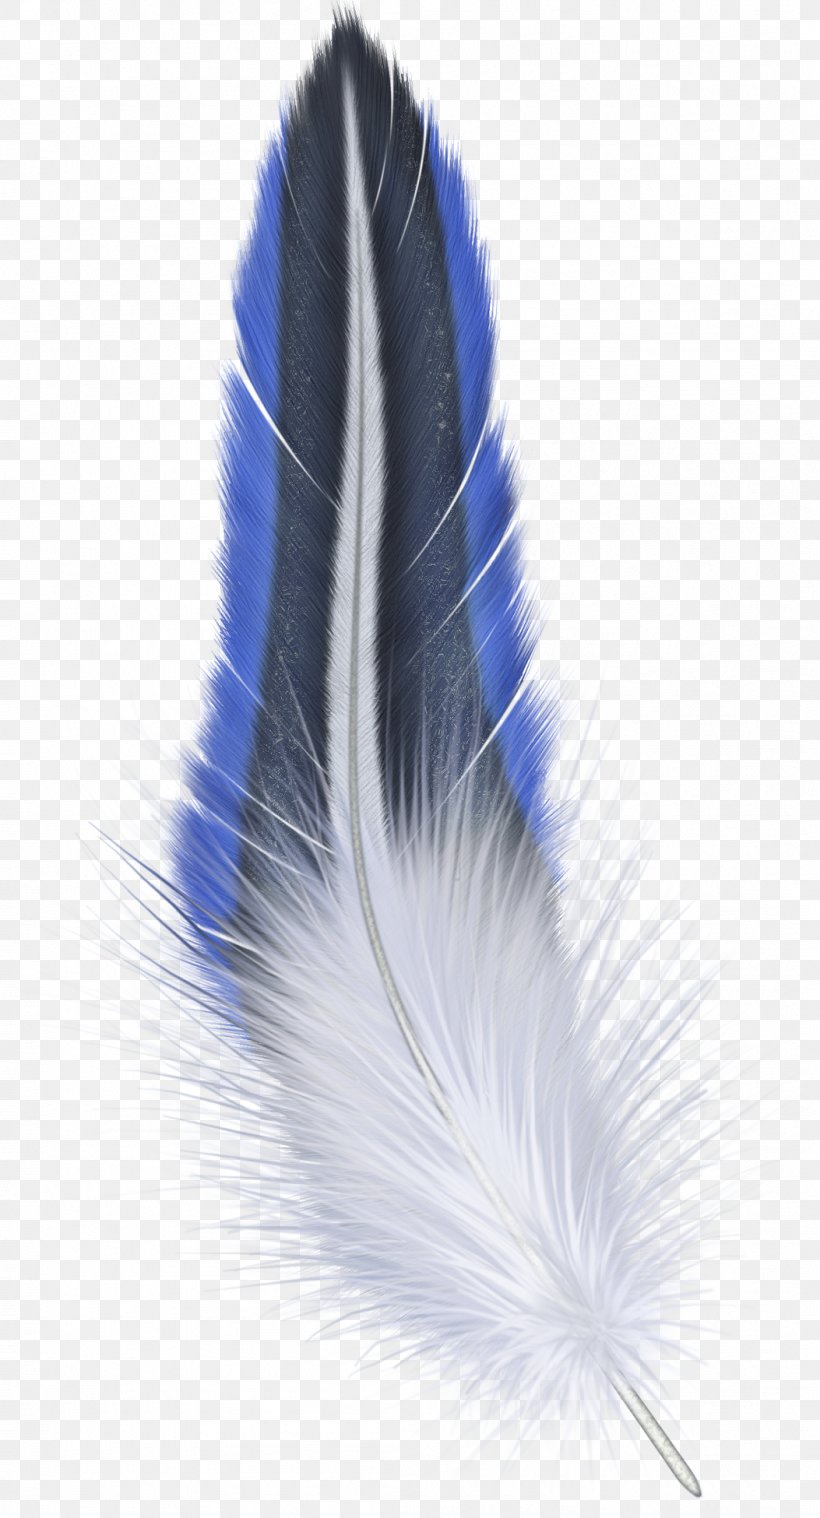 Bird Feather Clip Art, PNG, 1053x1950px, Bird, Eagle Feather Law, Feather, Image File Formats, Quill Download Free